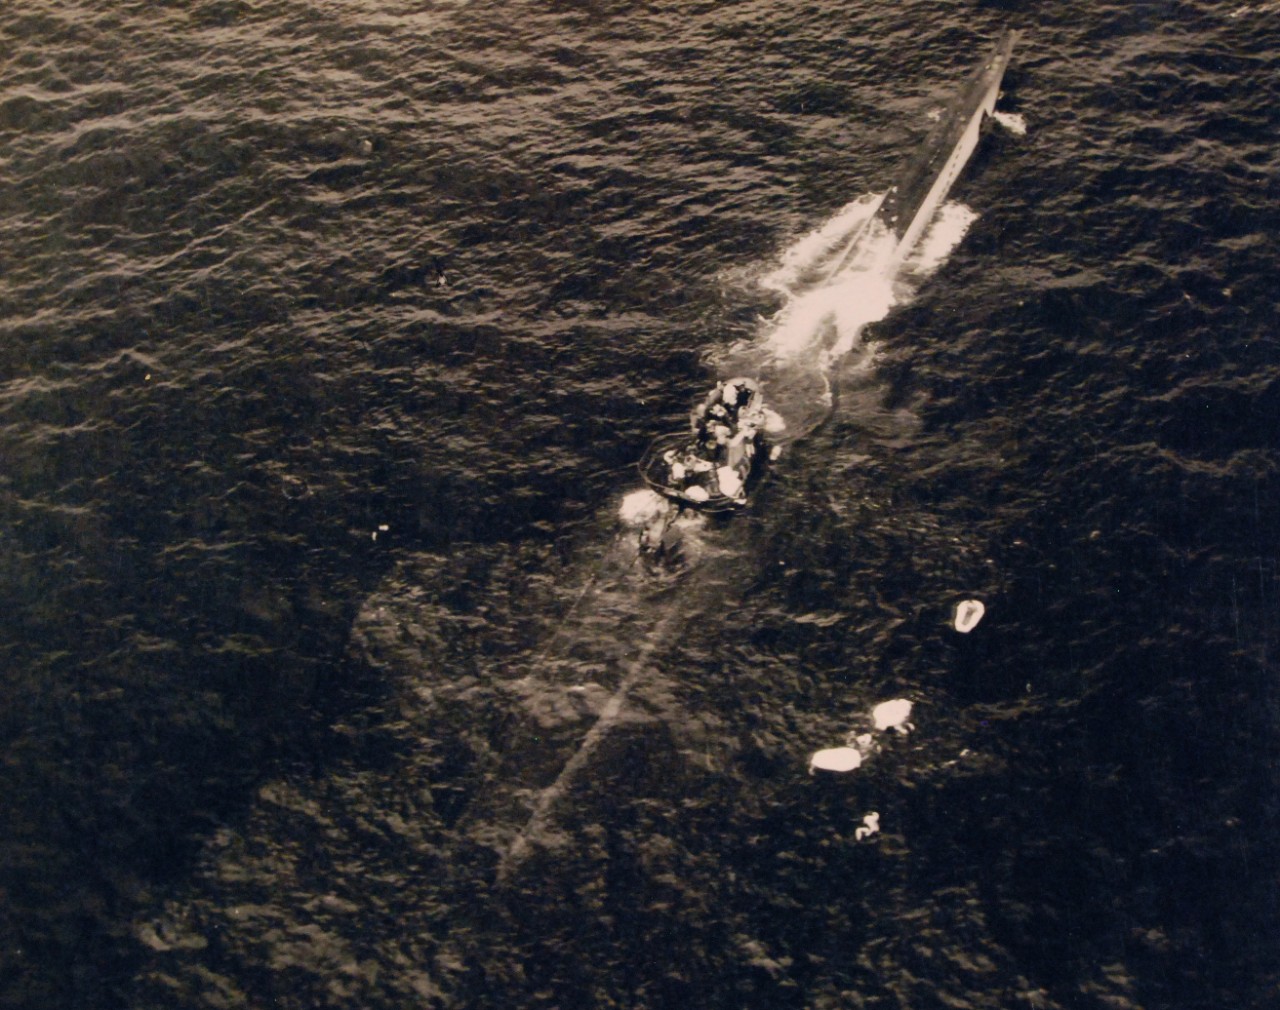 <p>80-G-79389: Air Attacks on German U-boats, WWII. German U-boat incident #3992, August 9, 1943. German submarine, U-664, sinking after an attack by Lieutenant Junior Grade G.G. Hogan, USNR. Forty-four survivors were picked up and taken on board USS Card (CVE-11). Note the German sailors on conning tower.&nbsp;</p>
